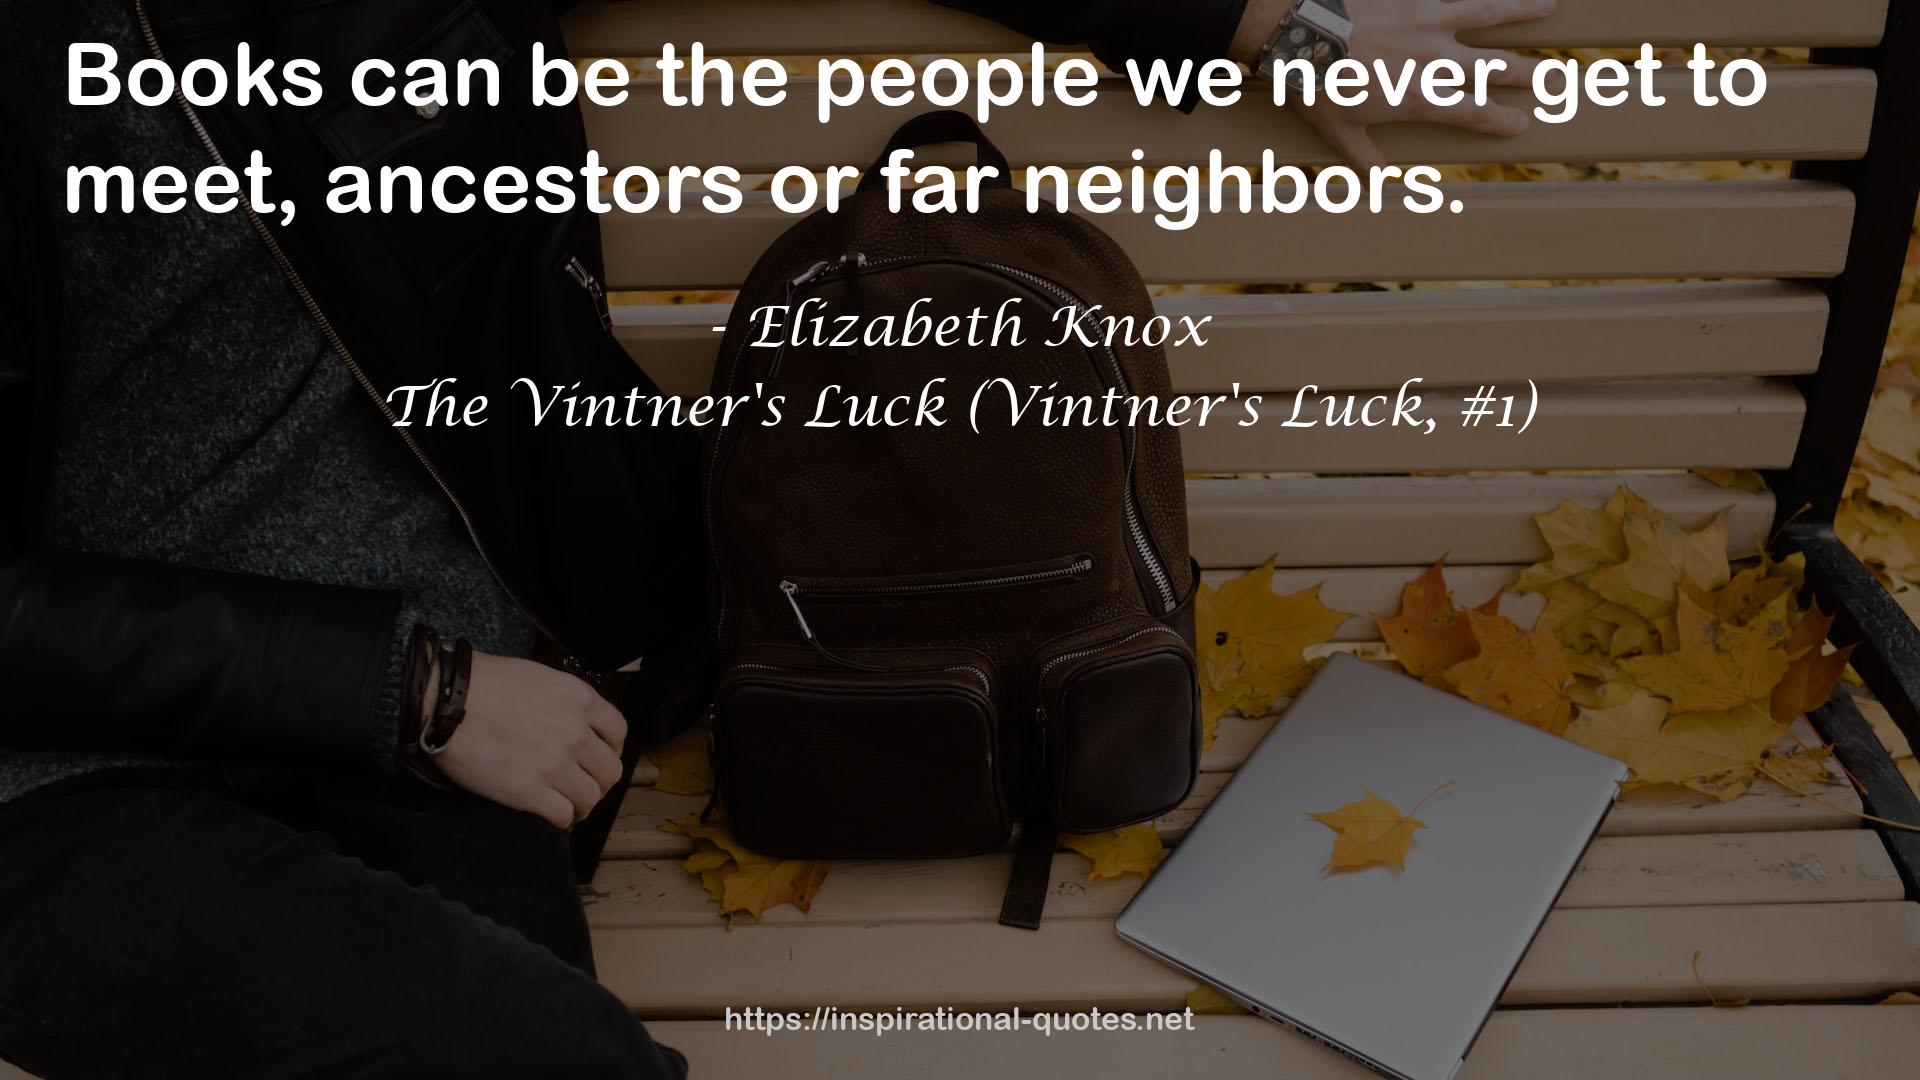 The Vintner's Luck (Vintner's Luck, #1) QUOTES